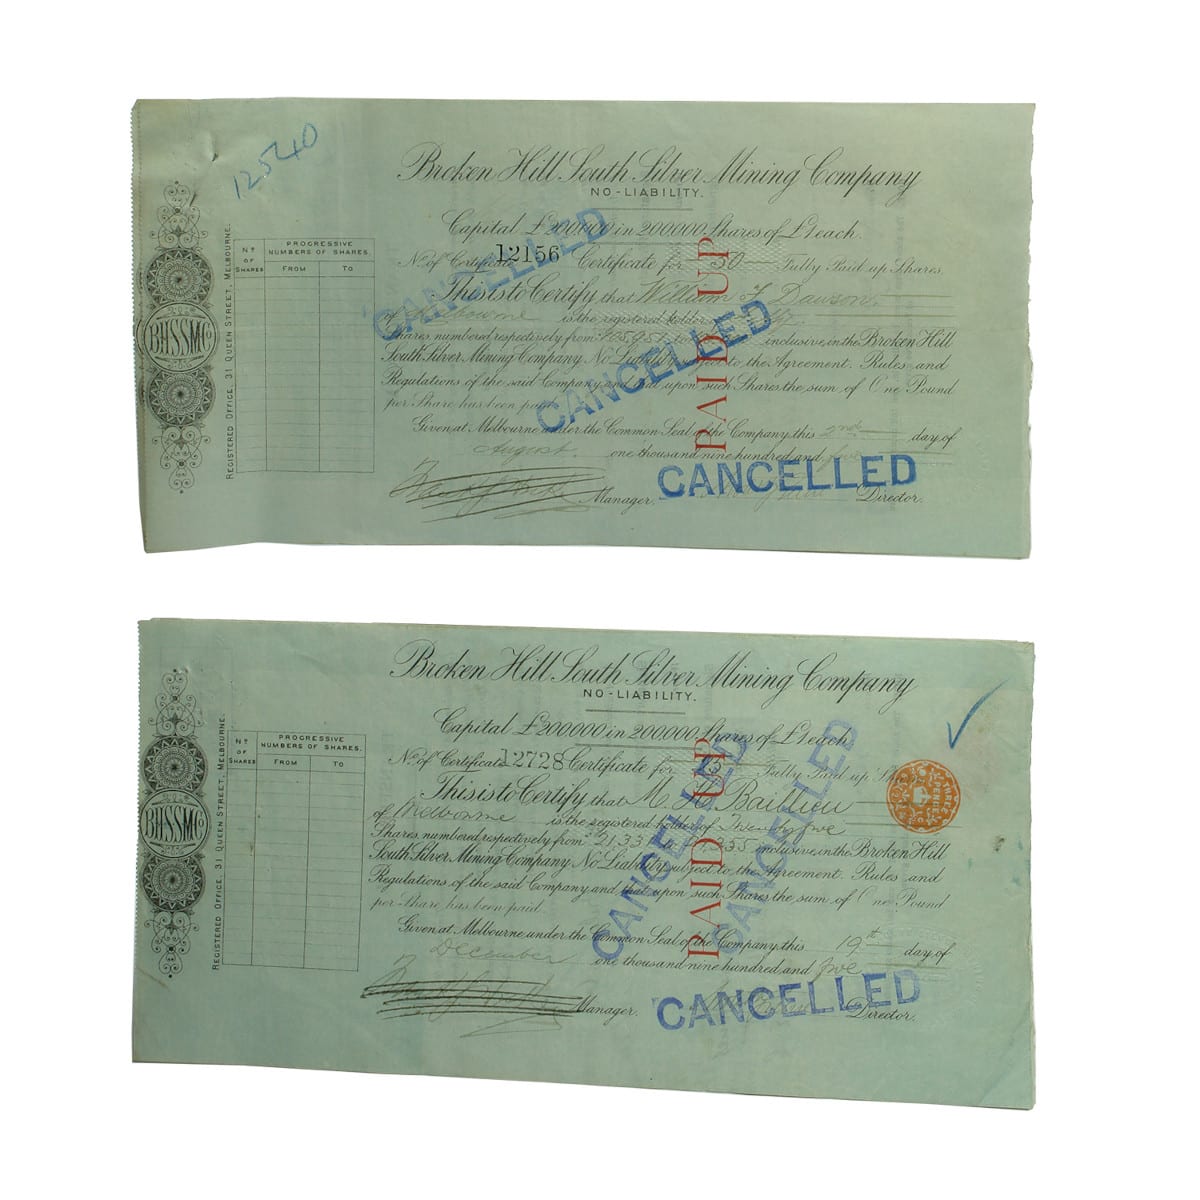 6 Share Certificates. Broken Hill South Silver Mining Company. (New South Wales)